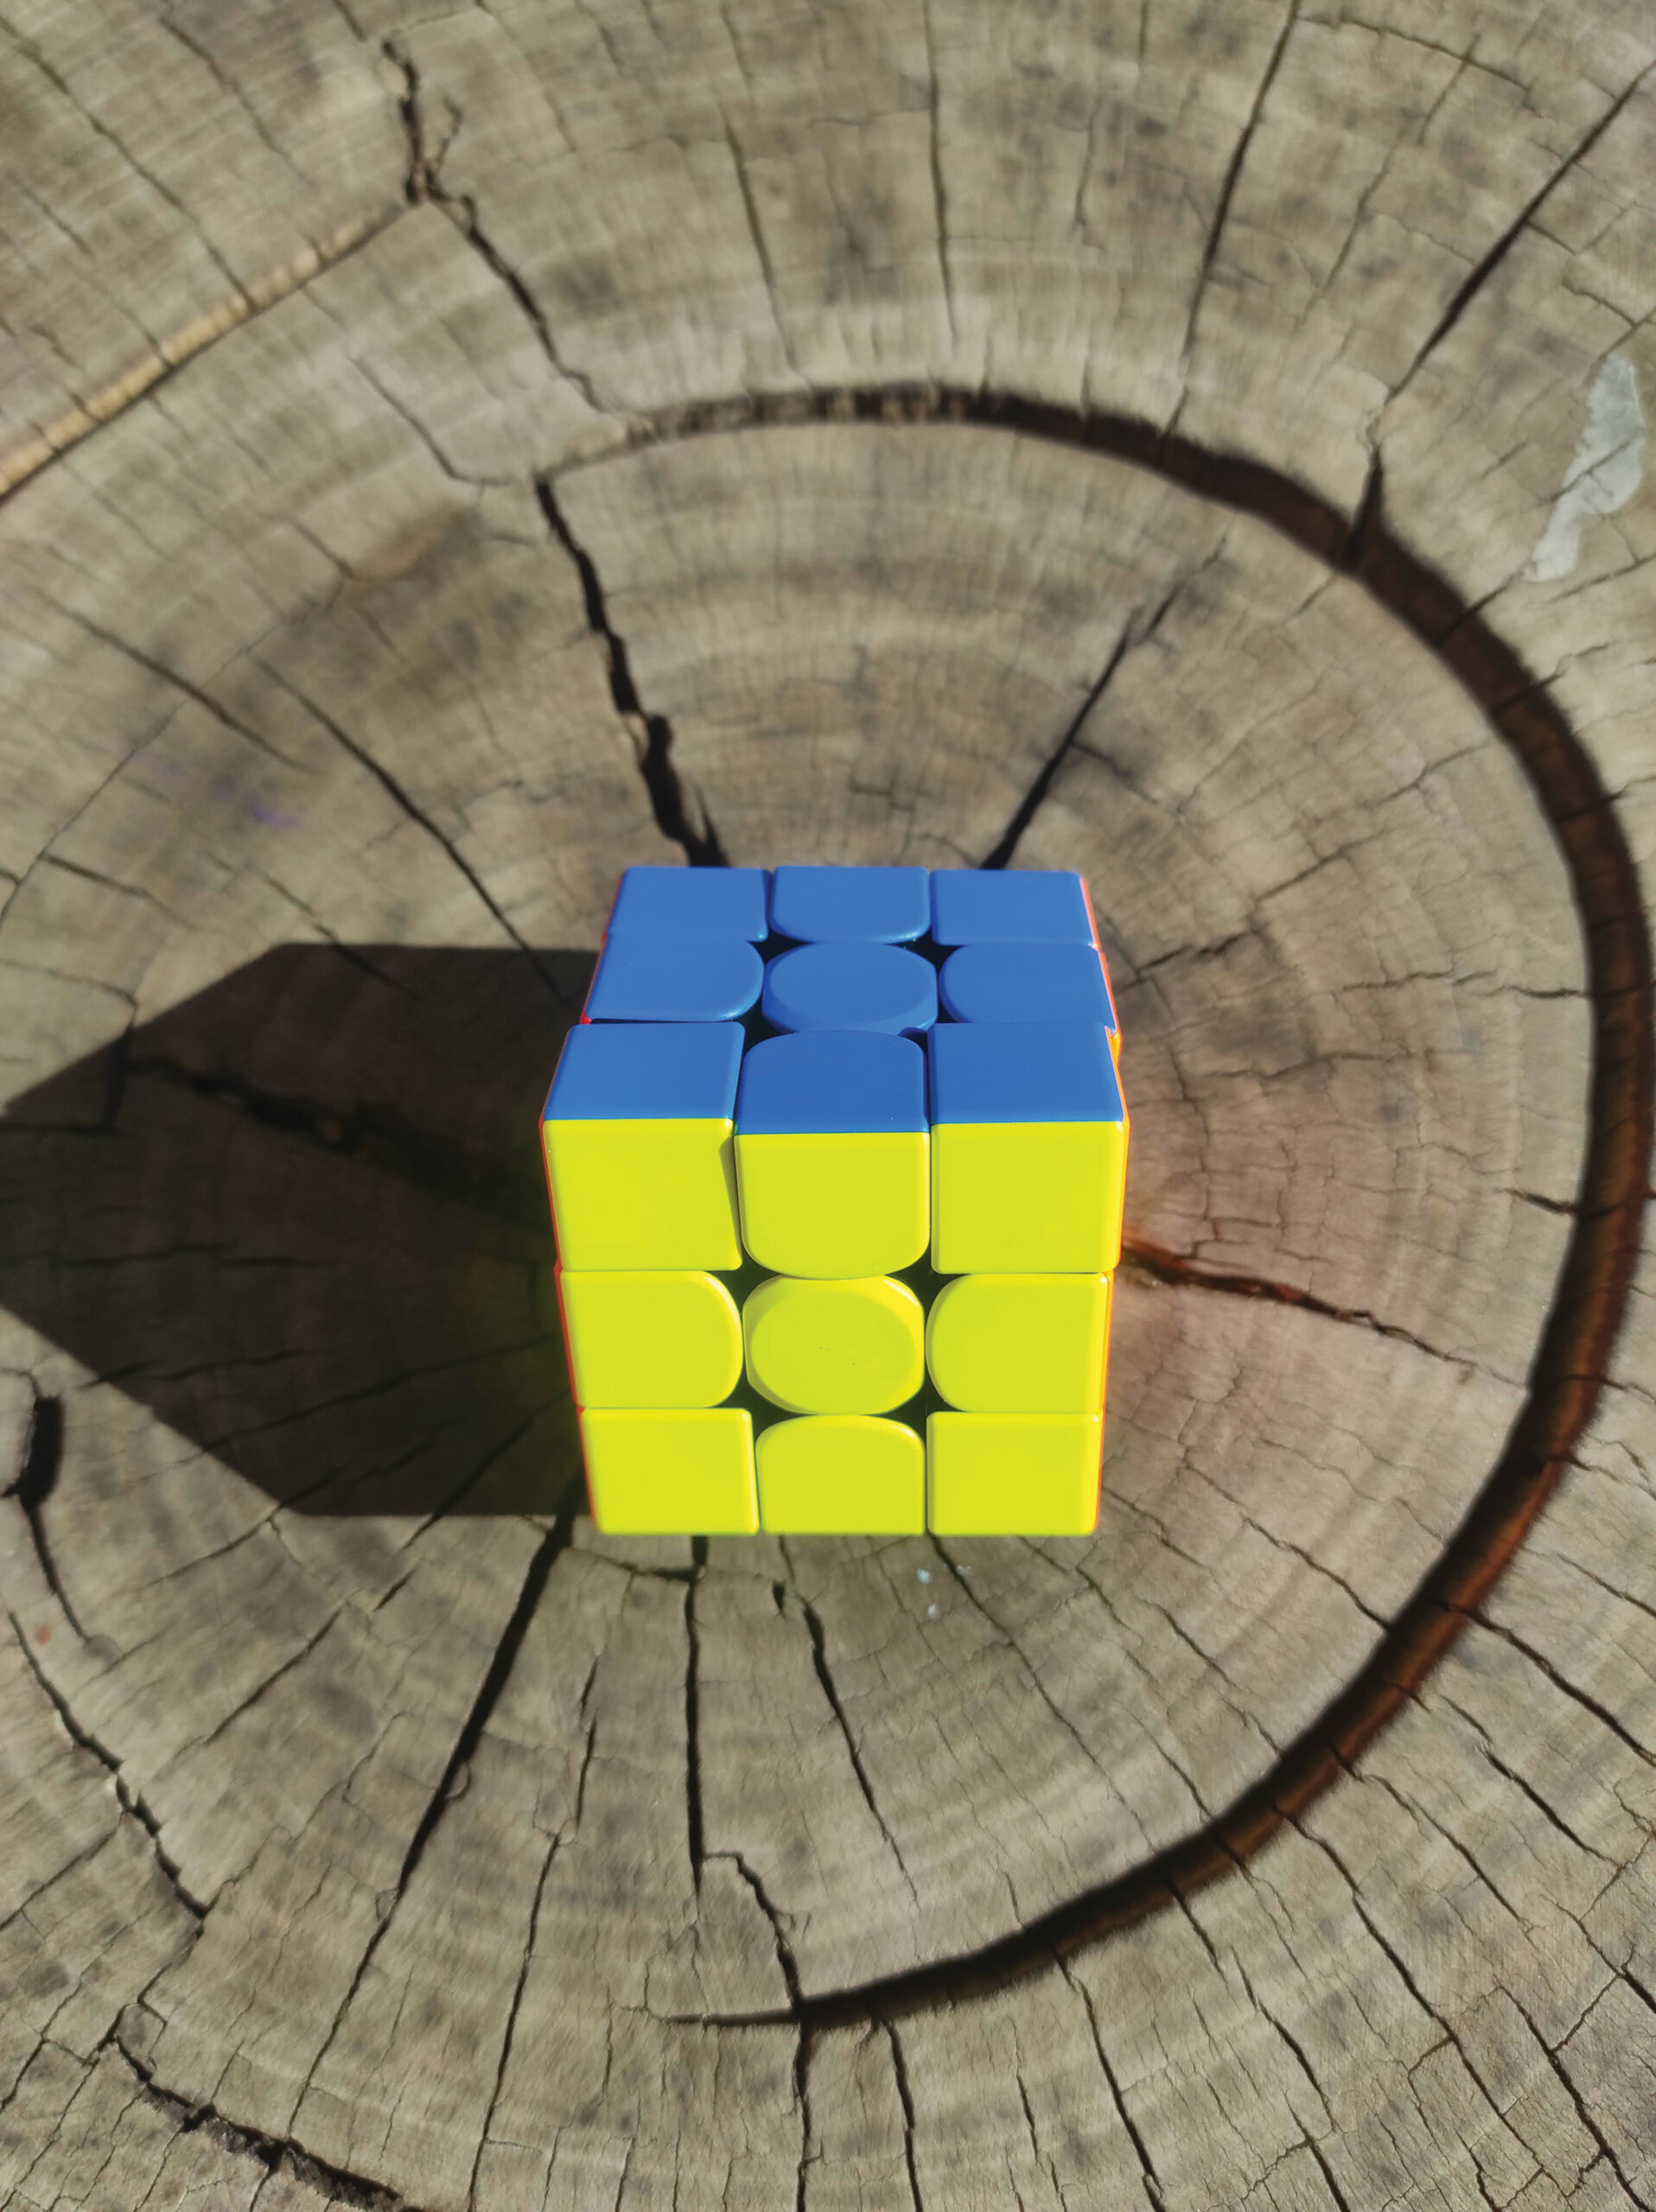 Rubik's cube blue and yellow sides